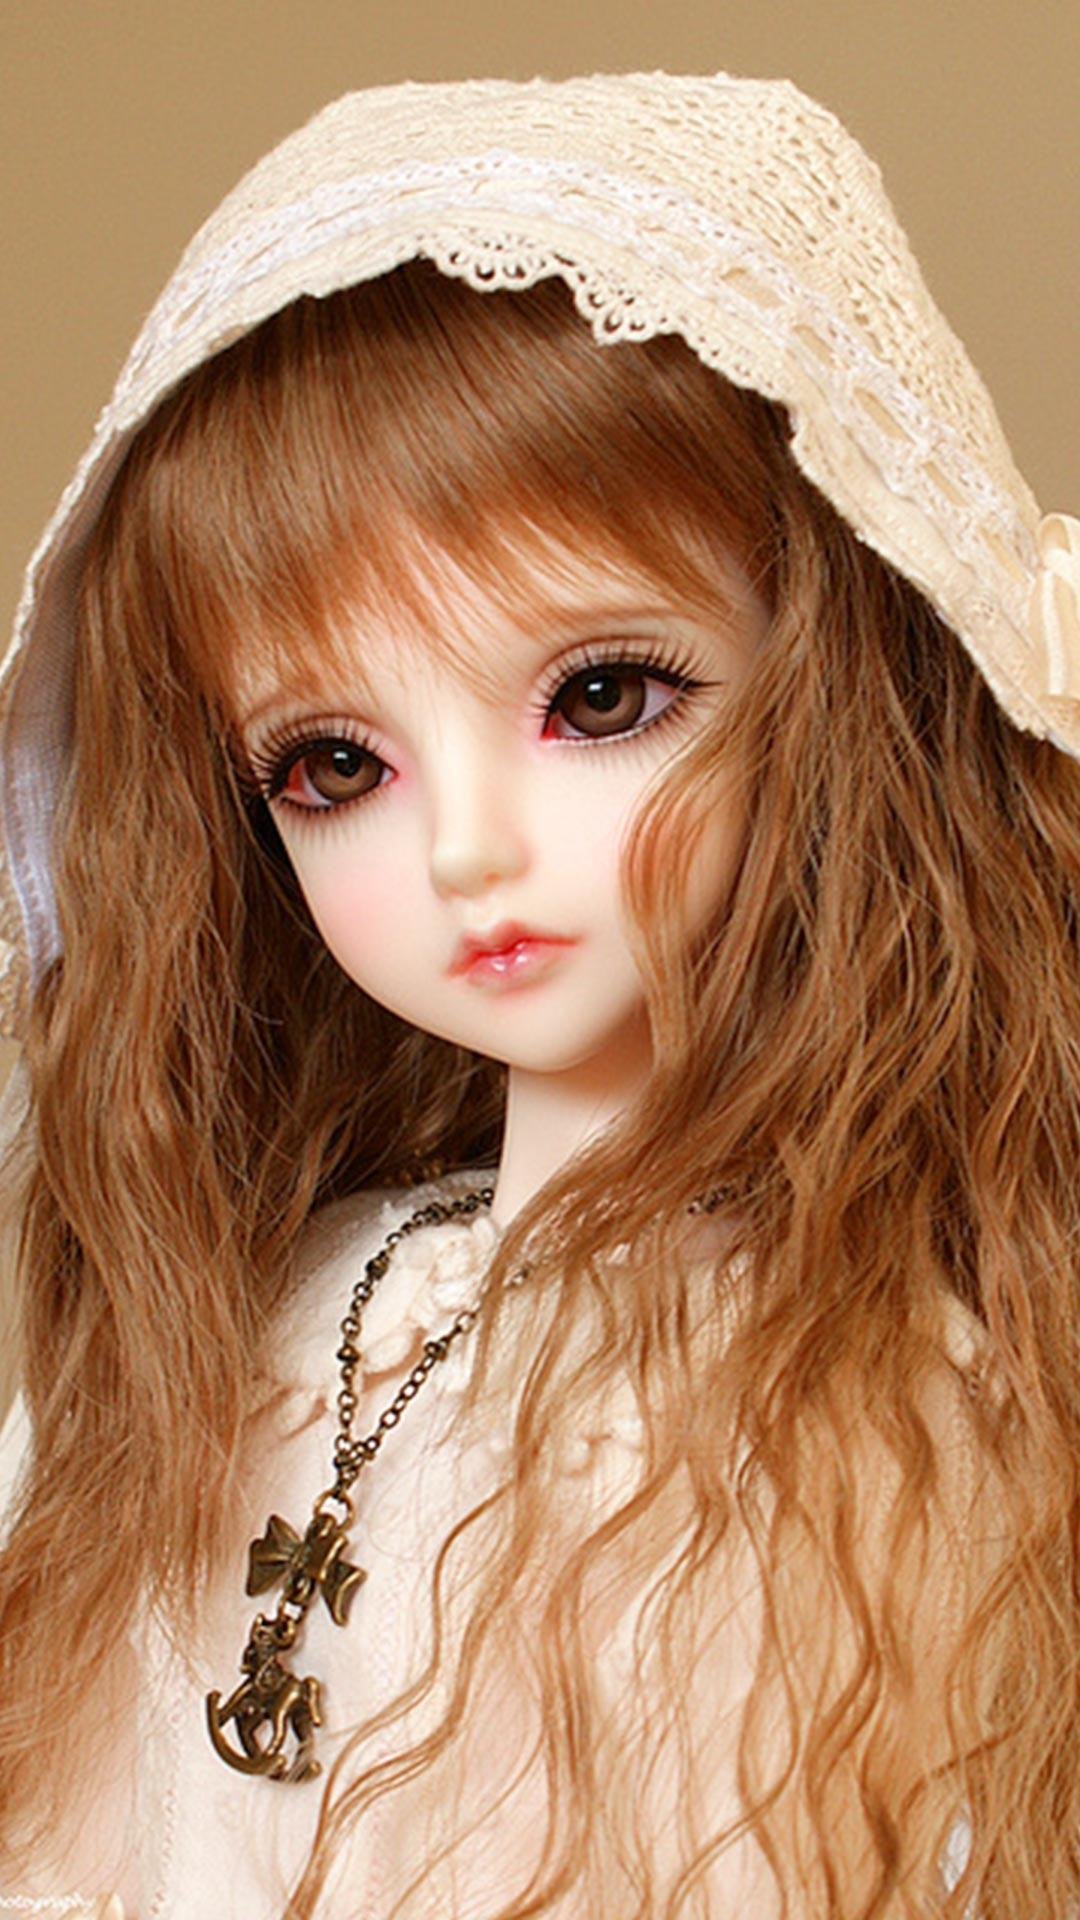 Cute Doll wallpaper by M_Phenomenal - Download on ZEDGE™ | a0fc